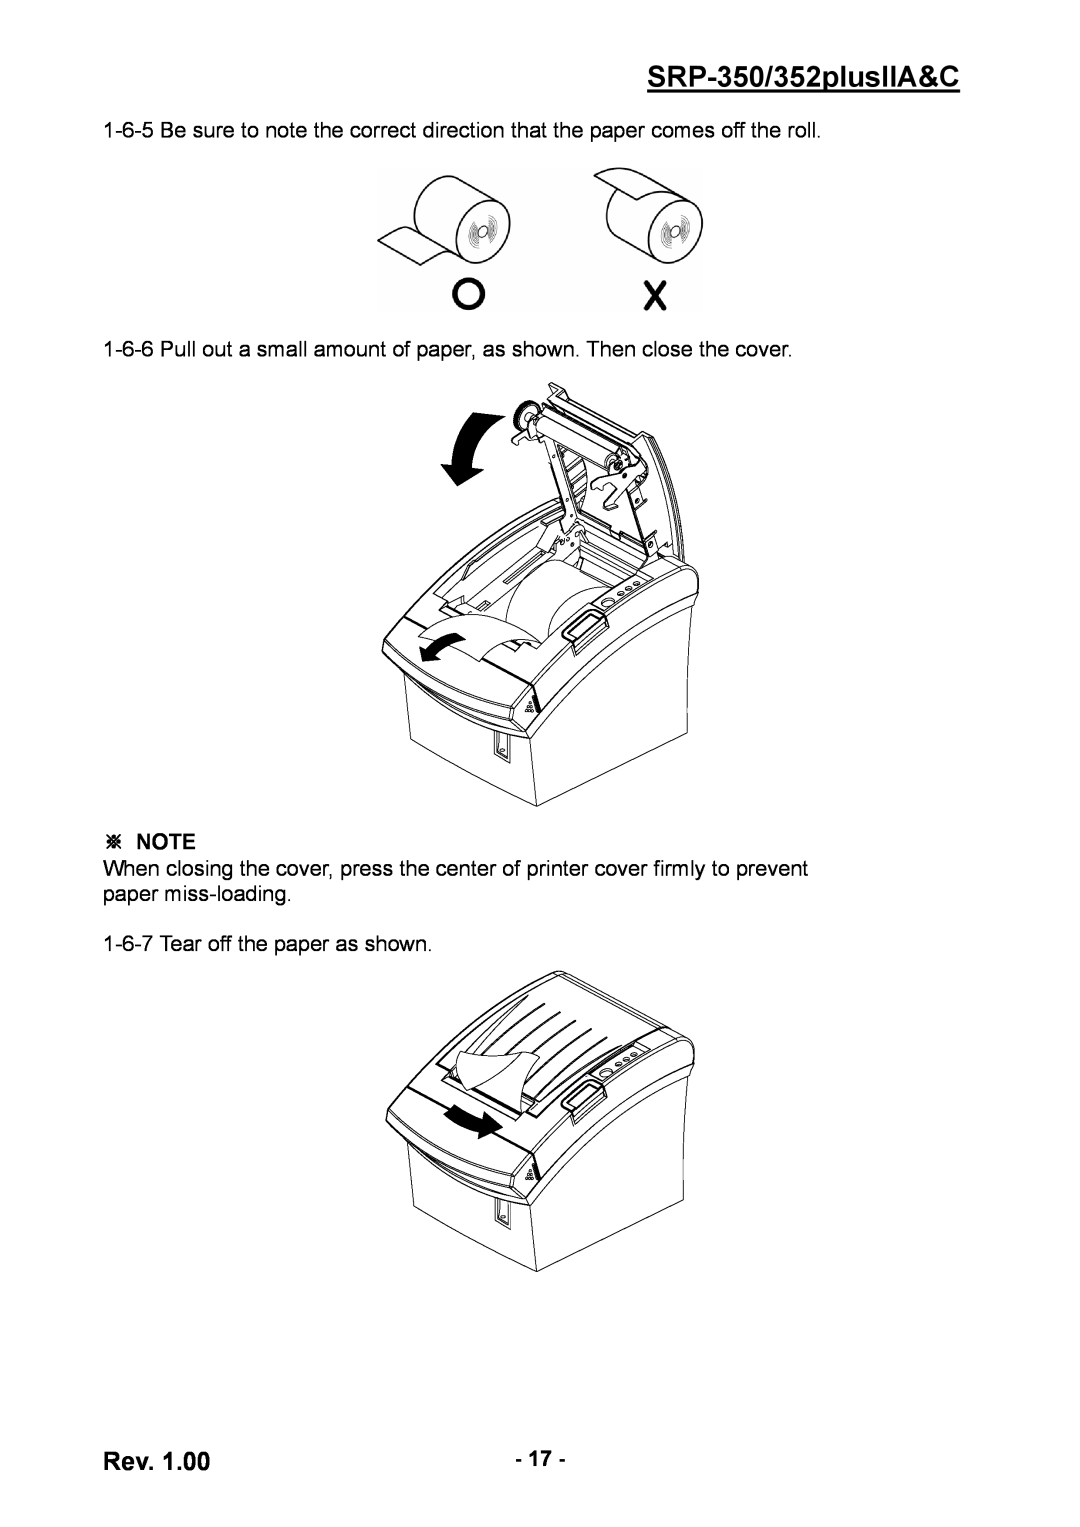 BIXOLON SRP-352 user manual SRP-350/352plusIIA&C, ※ Note, Tear off the paper as shown 